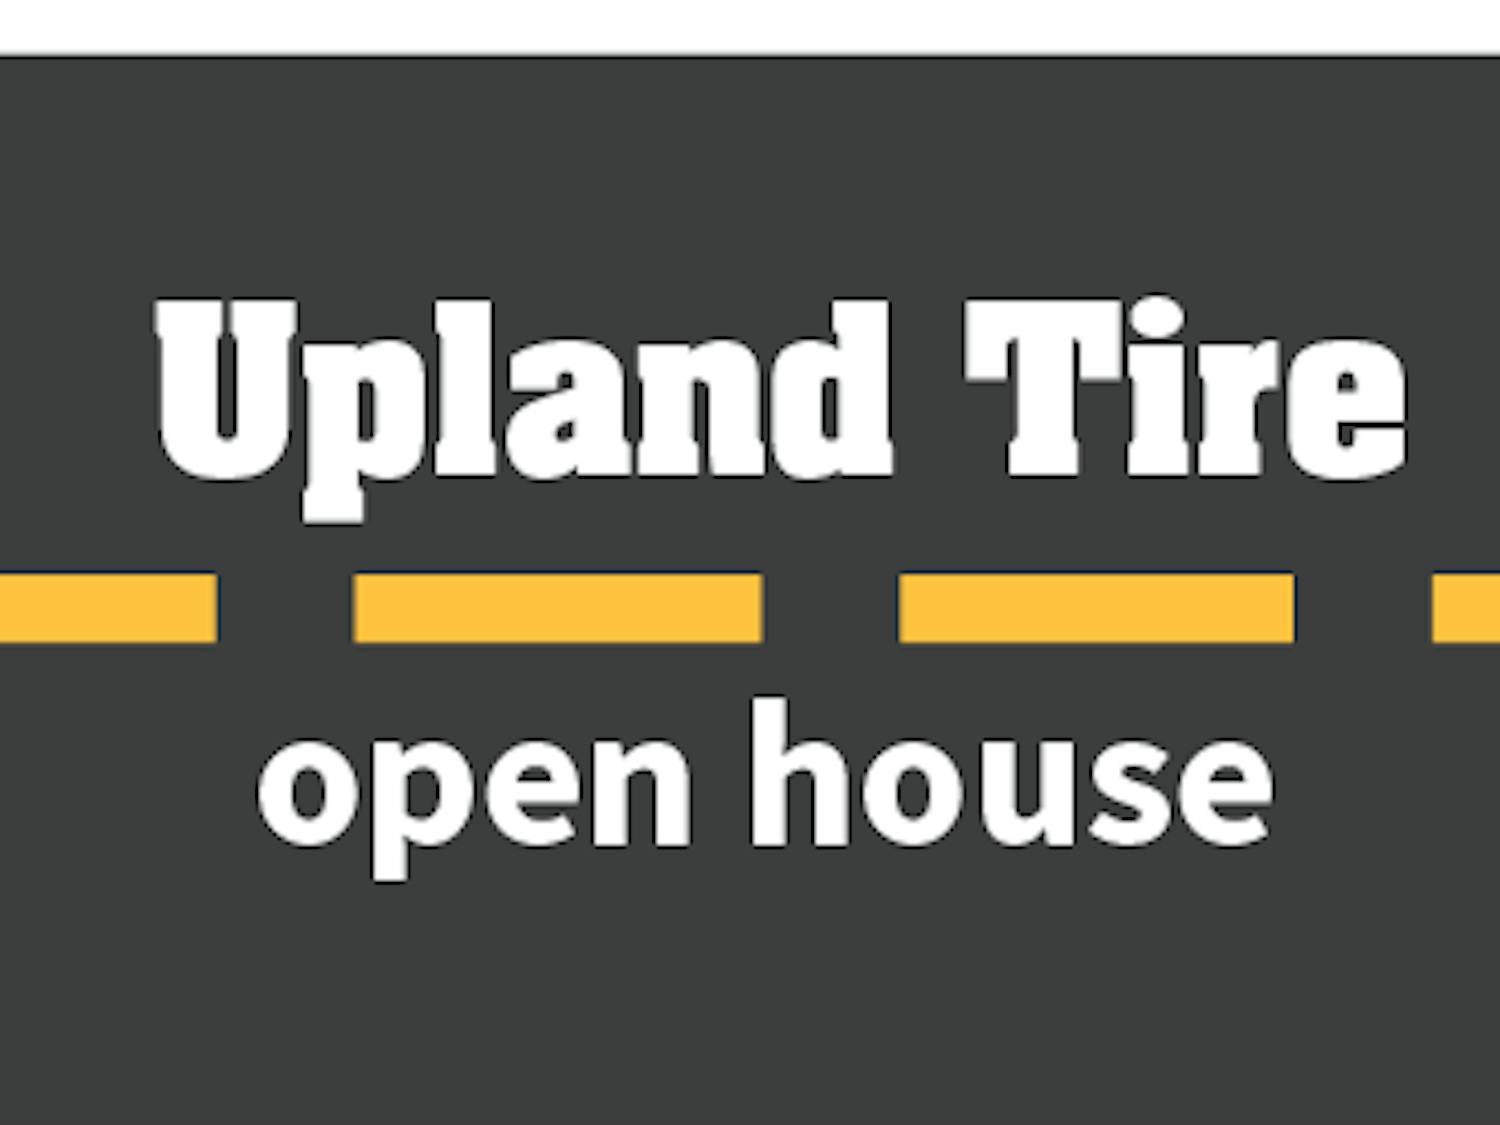 Upland-Tire.png